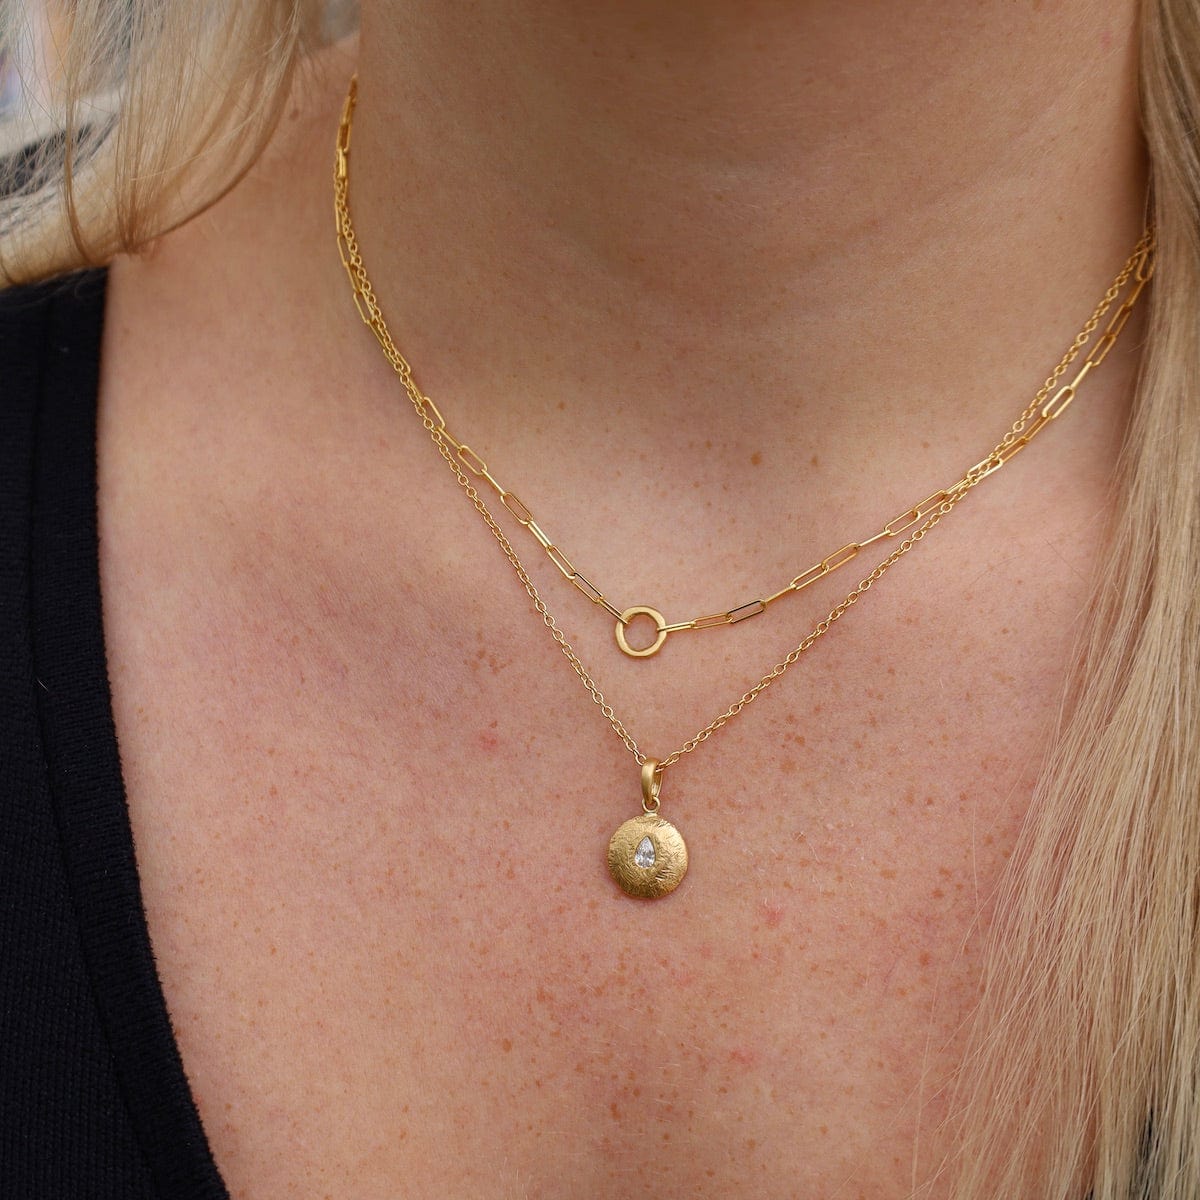 NKL-14K 'Luna' Paperclip and Organic Circle Necklace